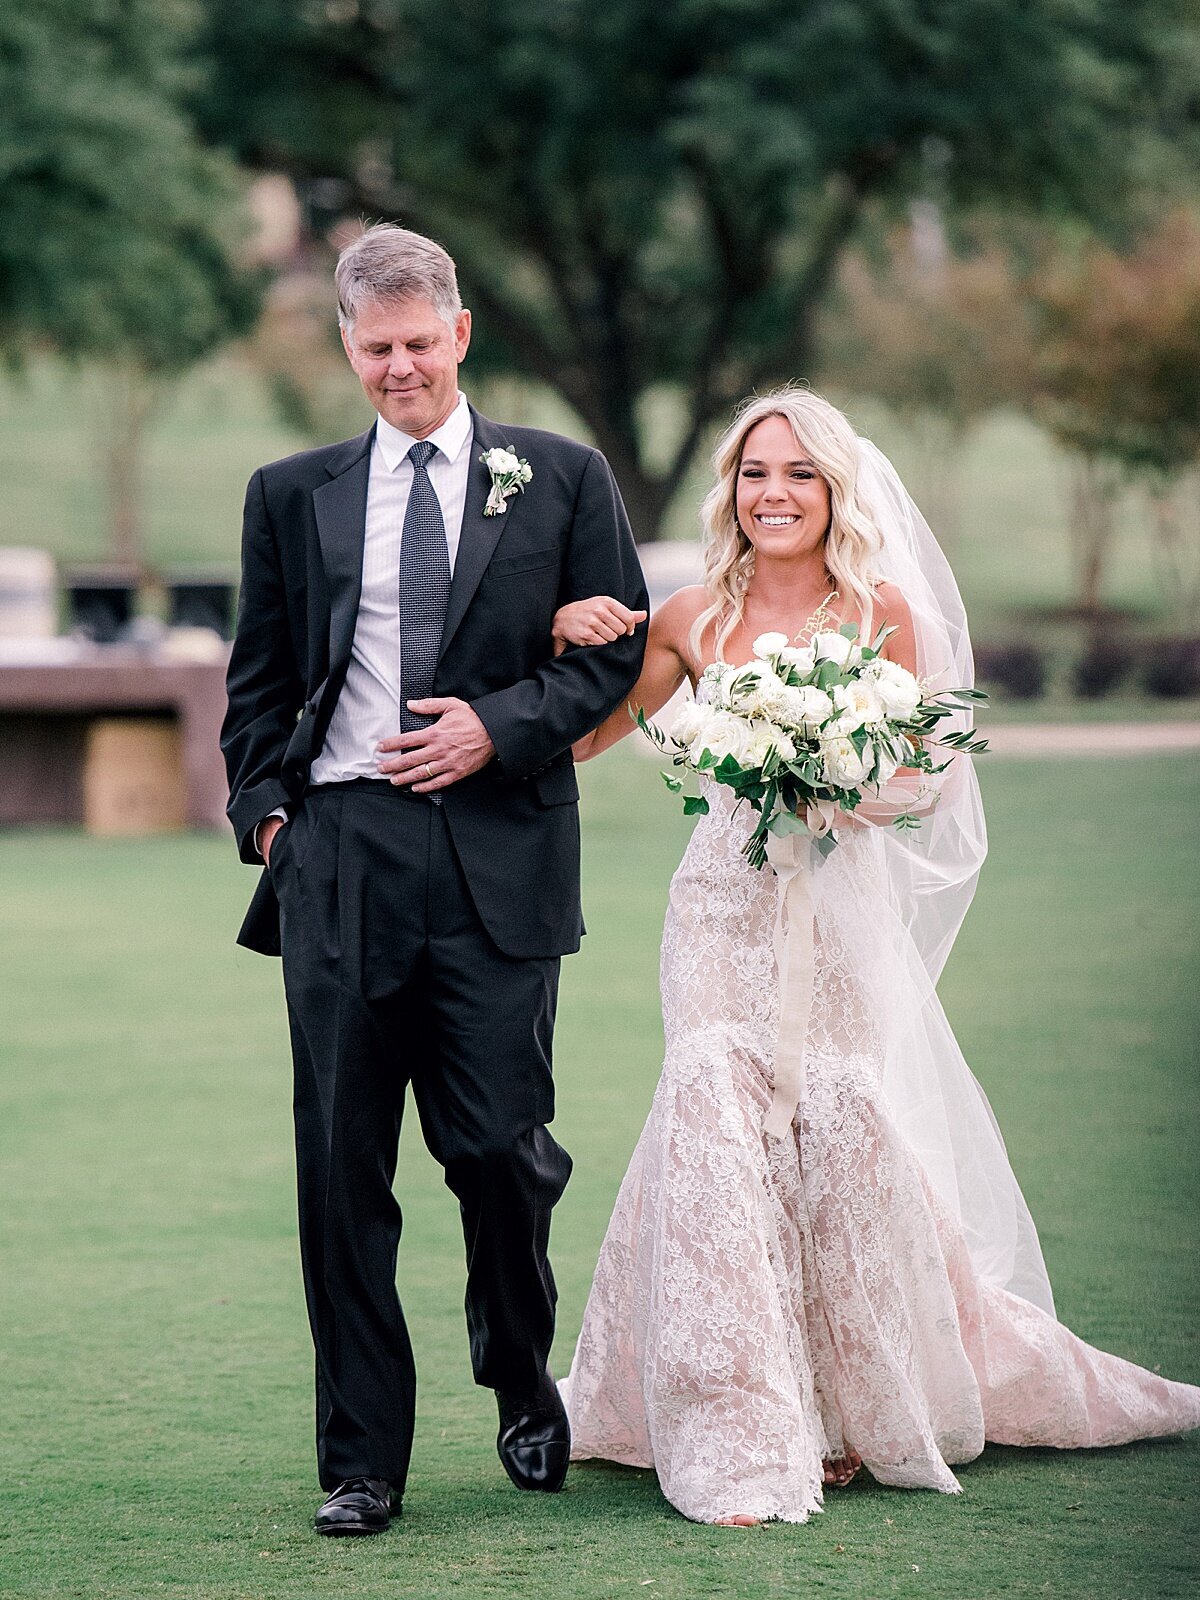 Wedding Ceremony at Dallas Forth Worth Four Seasons | Bridal Bouquet by Vella Nest Floral Design